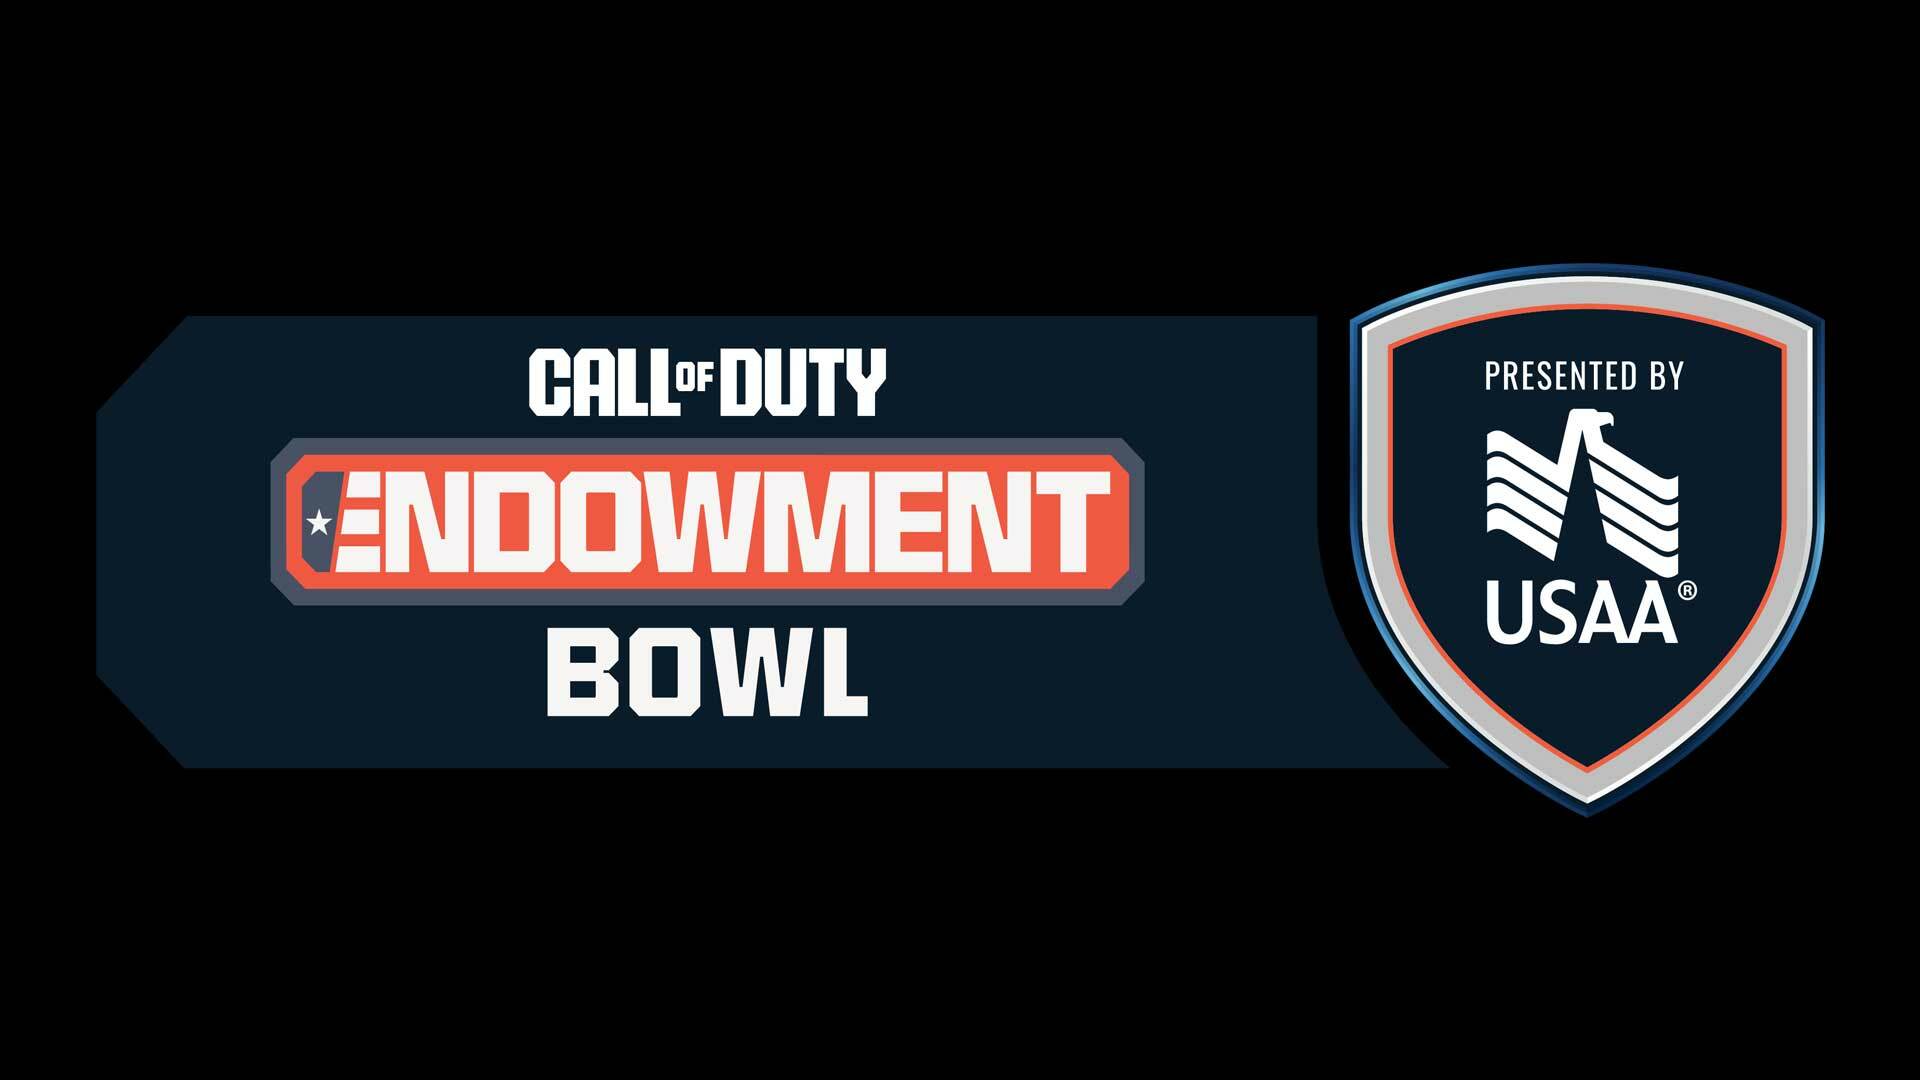 Call of Duty: Next: Every Major Announcement and Call of Duty Endowment ( C.O.D.E.) Bowl IV [UPDATING]